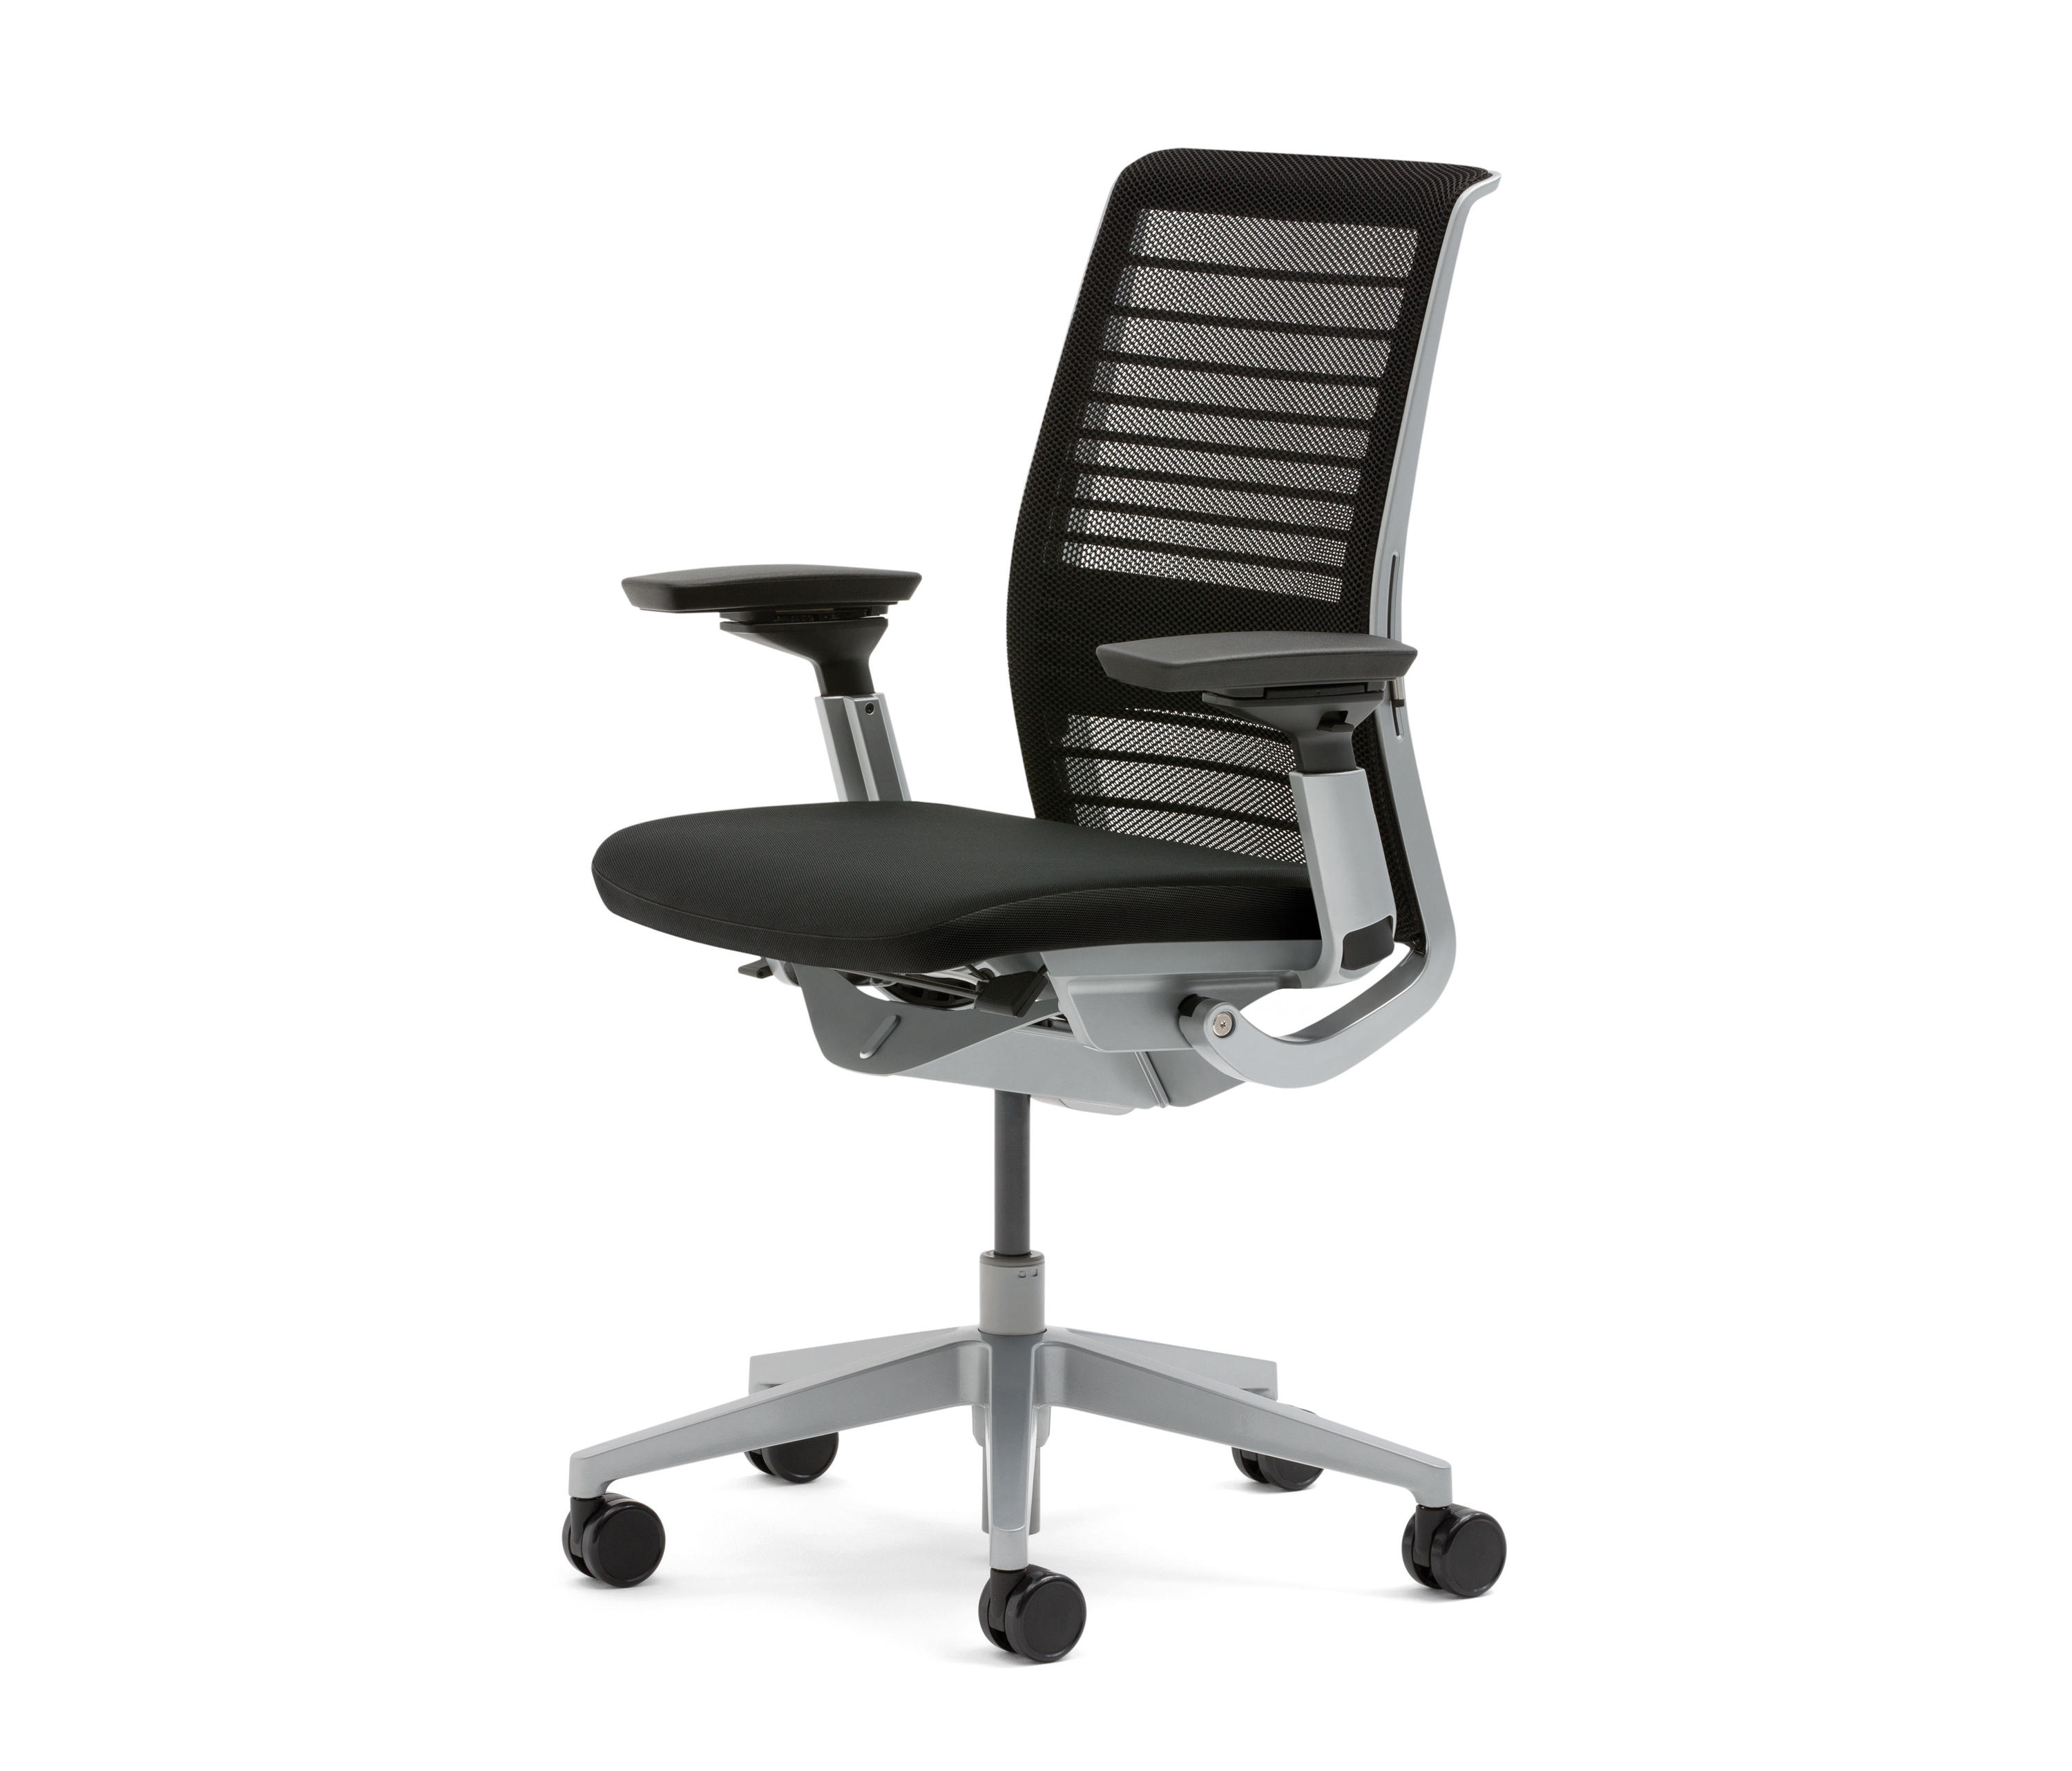 THINK CHAIR - Office chairs from Steelcase | Architonic